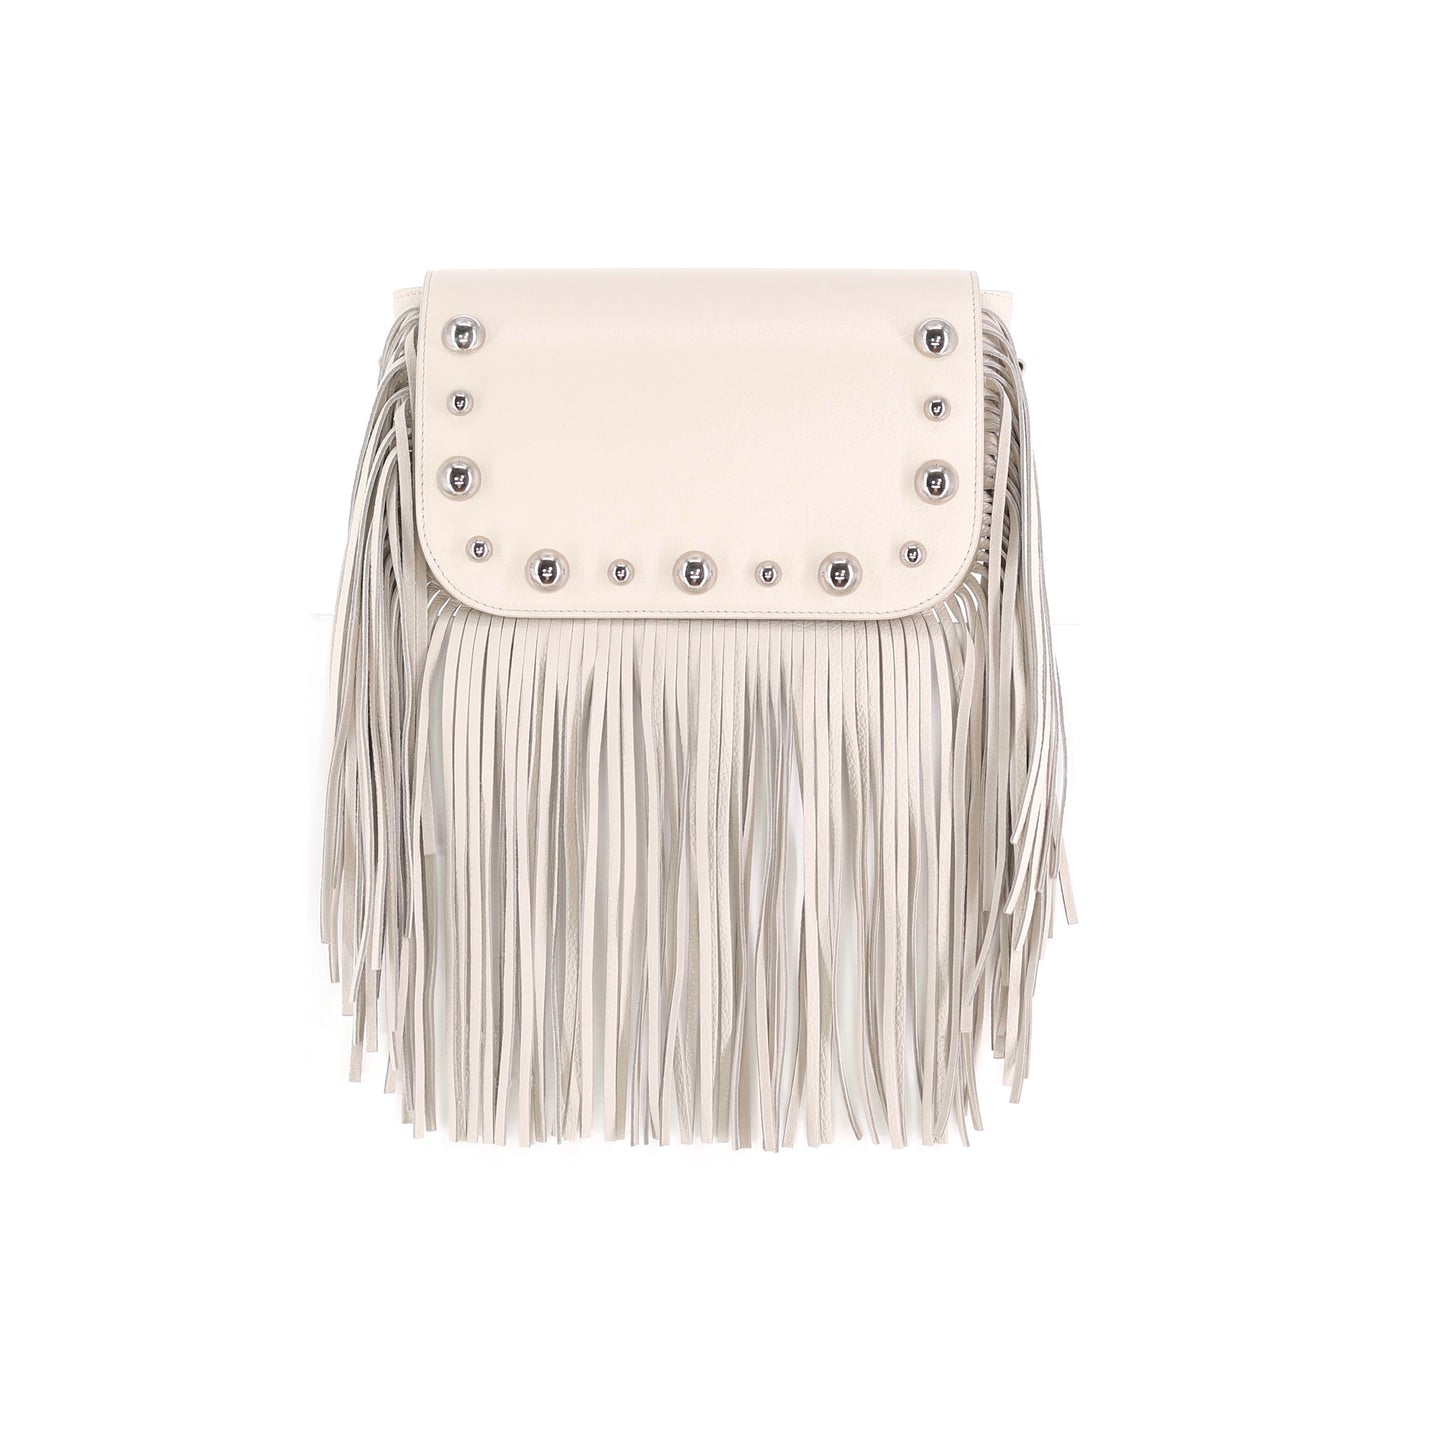 GABRIELLE handbag with fringes genuine leather beige small